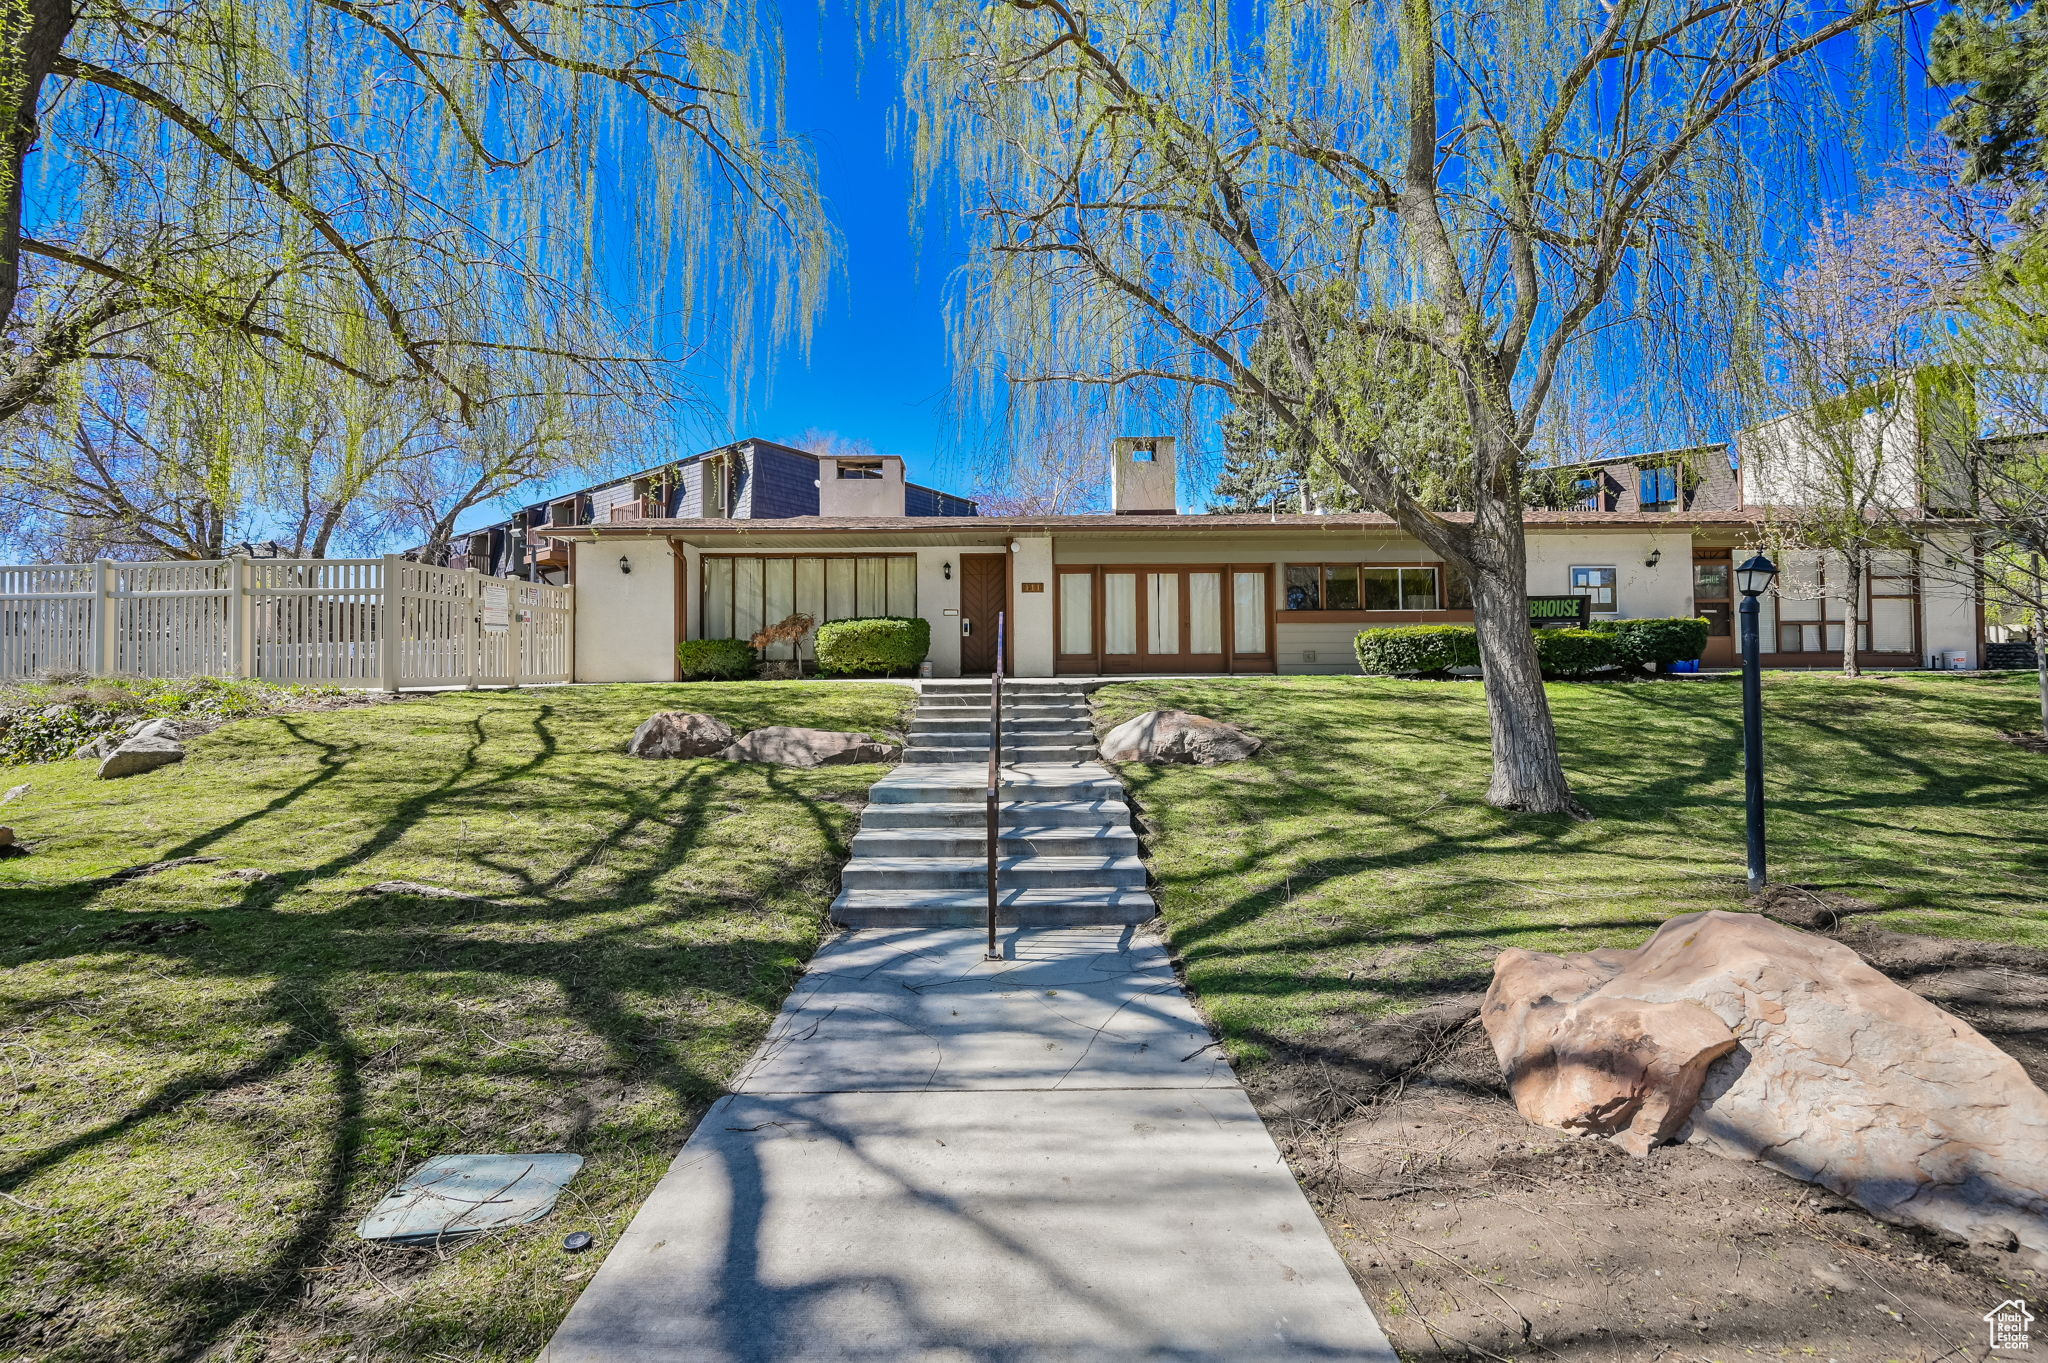 5561 S WILLOW E #F, Murray, Utah 84107, 2 Bedrooms Bedrooms, 6 Rooms Rooms,1 BathroomBathrooms,Residential,For sale,WILLOW,1990052